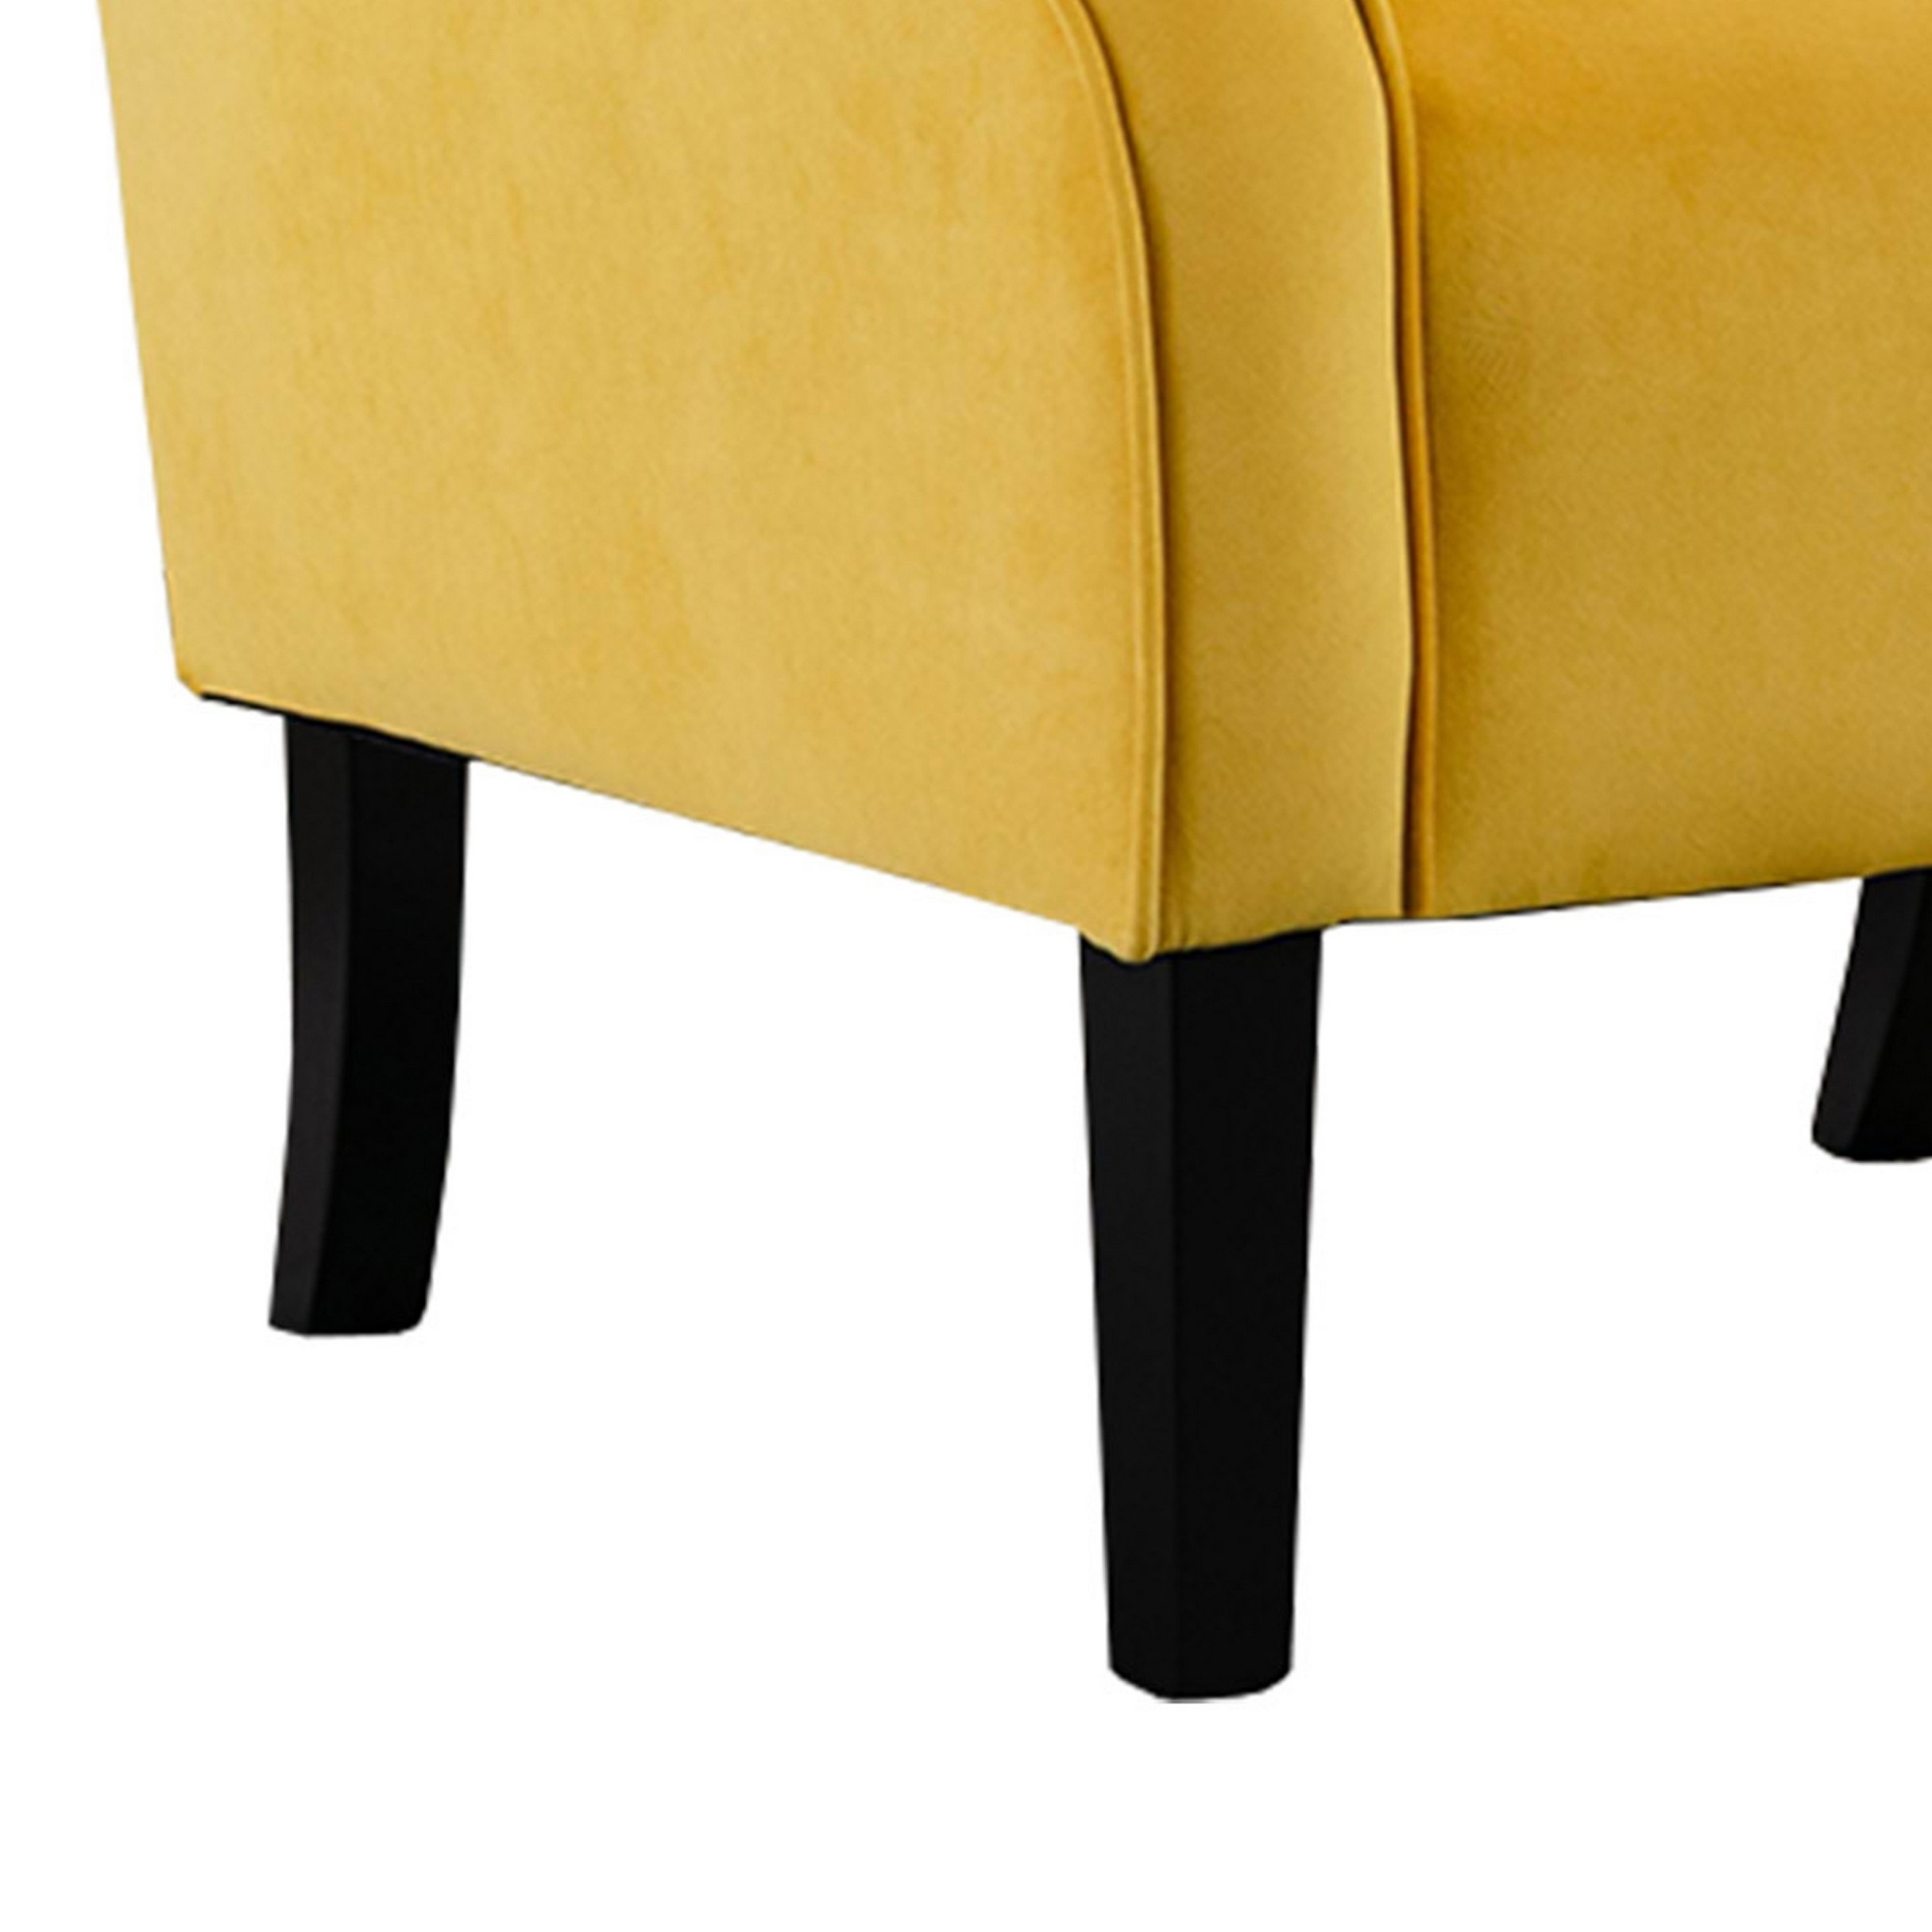 Cilic 32 Inch Accent Chair, Button Tufted Back, Rolled Arms, Yellow Fabric- Saltoro Sherpi